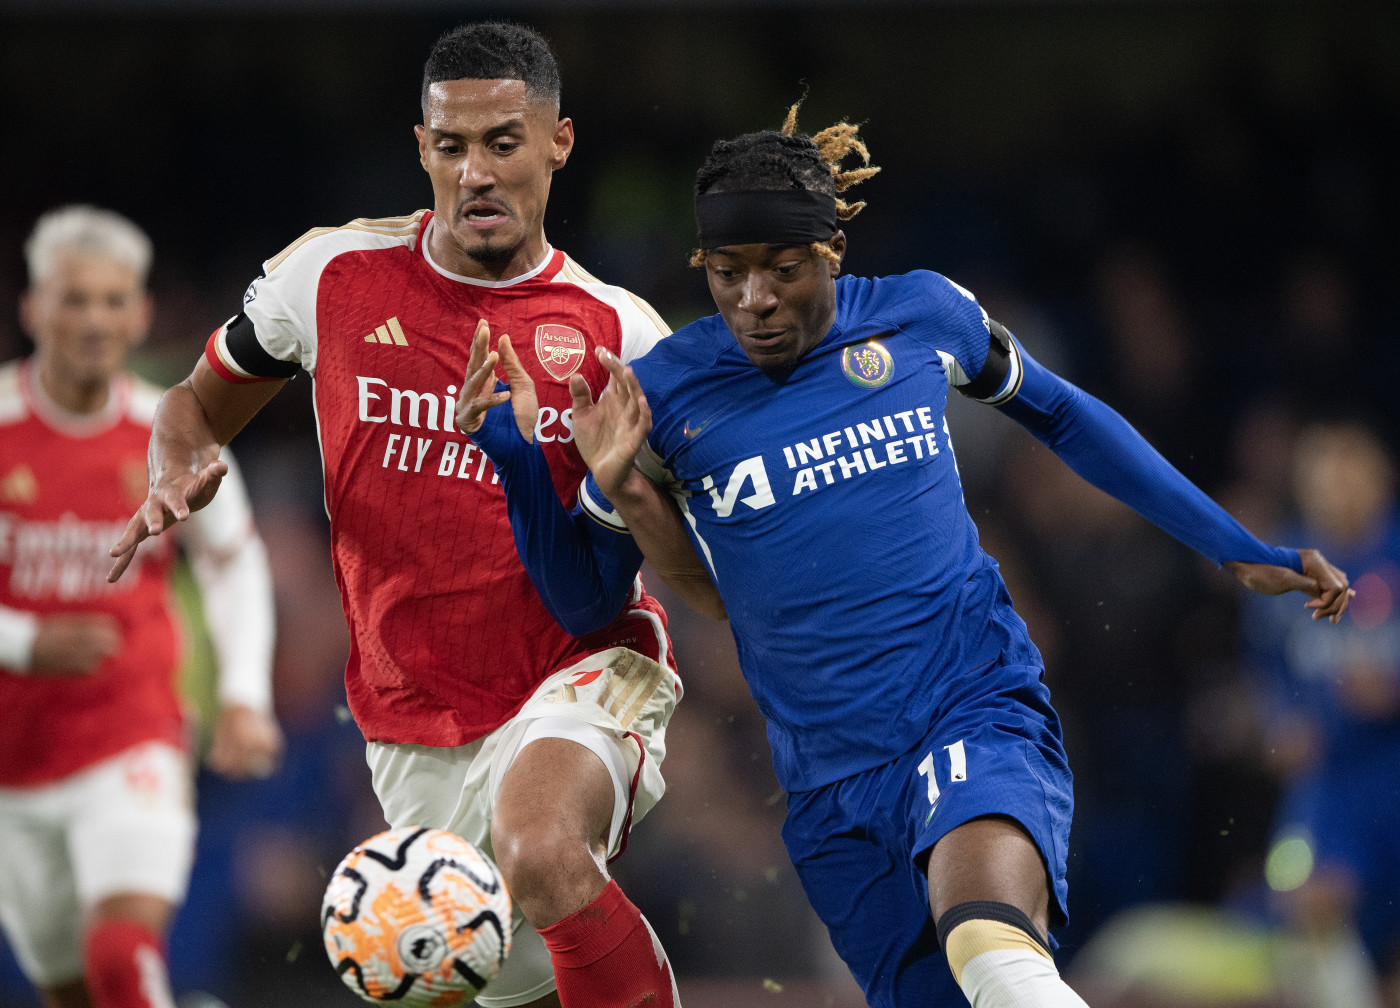 Arsenal's last visit to Stamford Bridge ended in a 2-2 draw